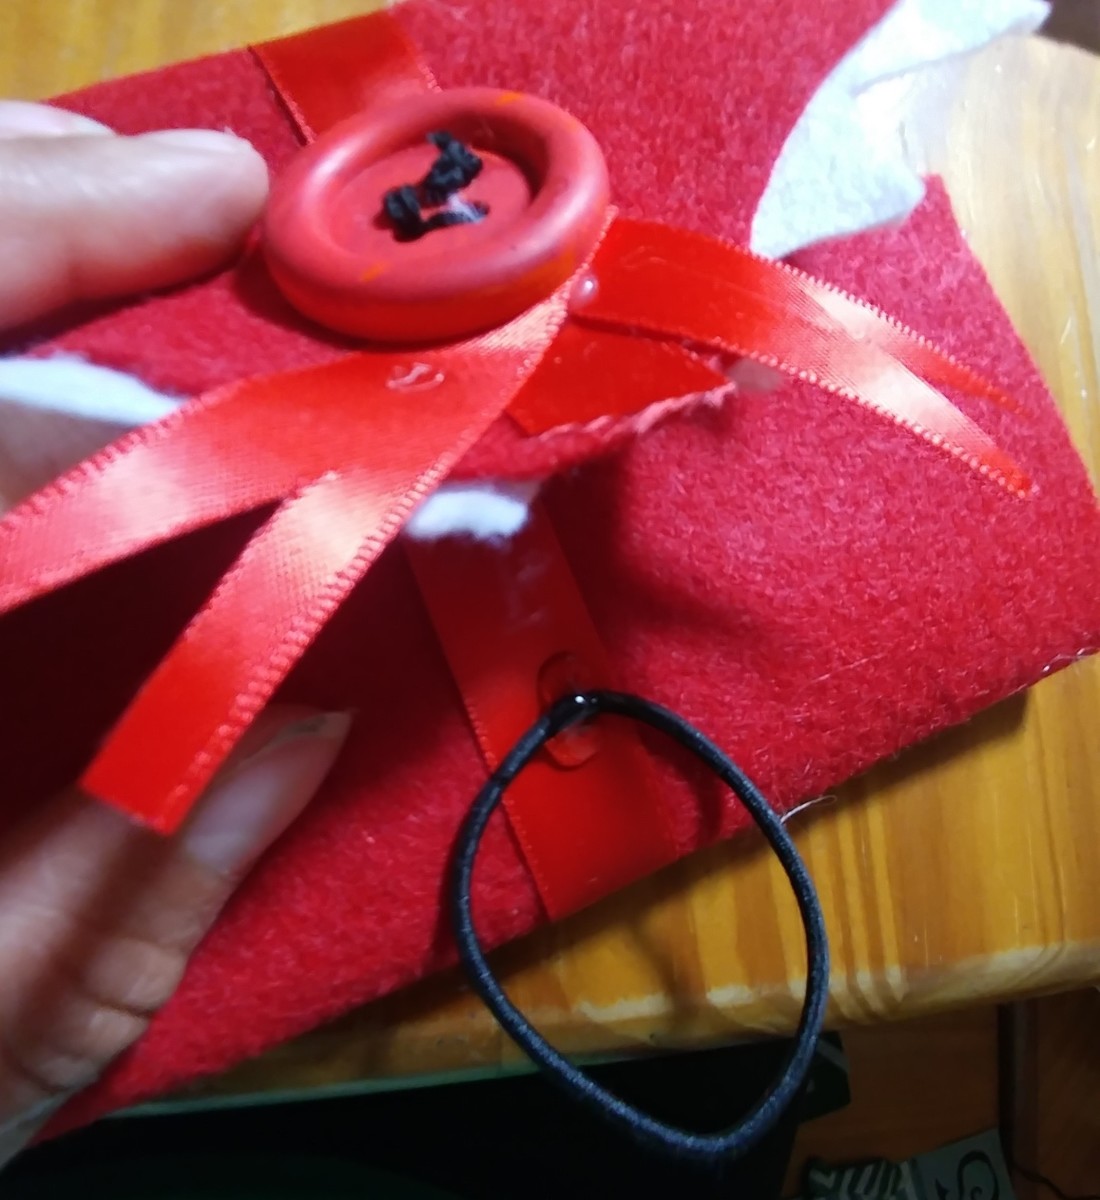 Glue black hair tie onto the bottom flap, so that the envelope can be closed.